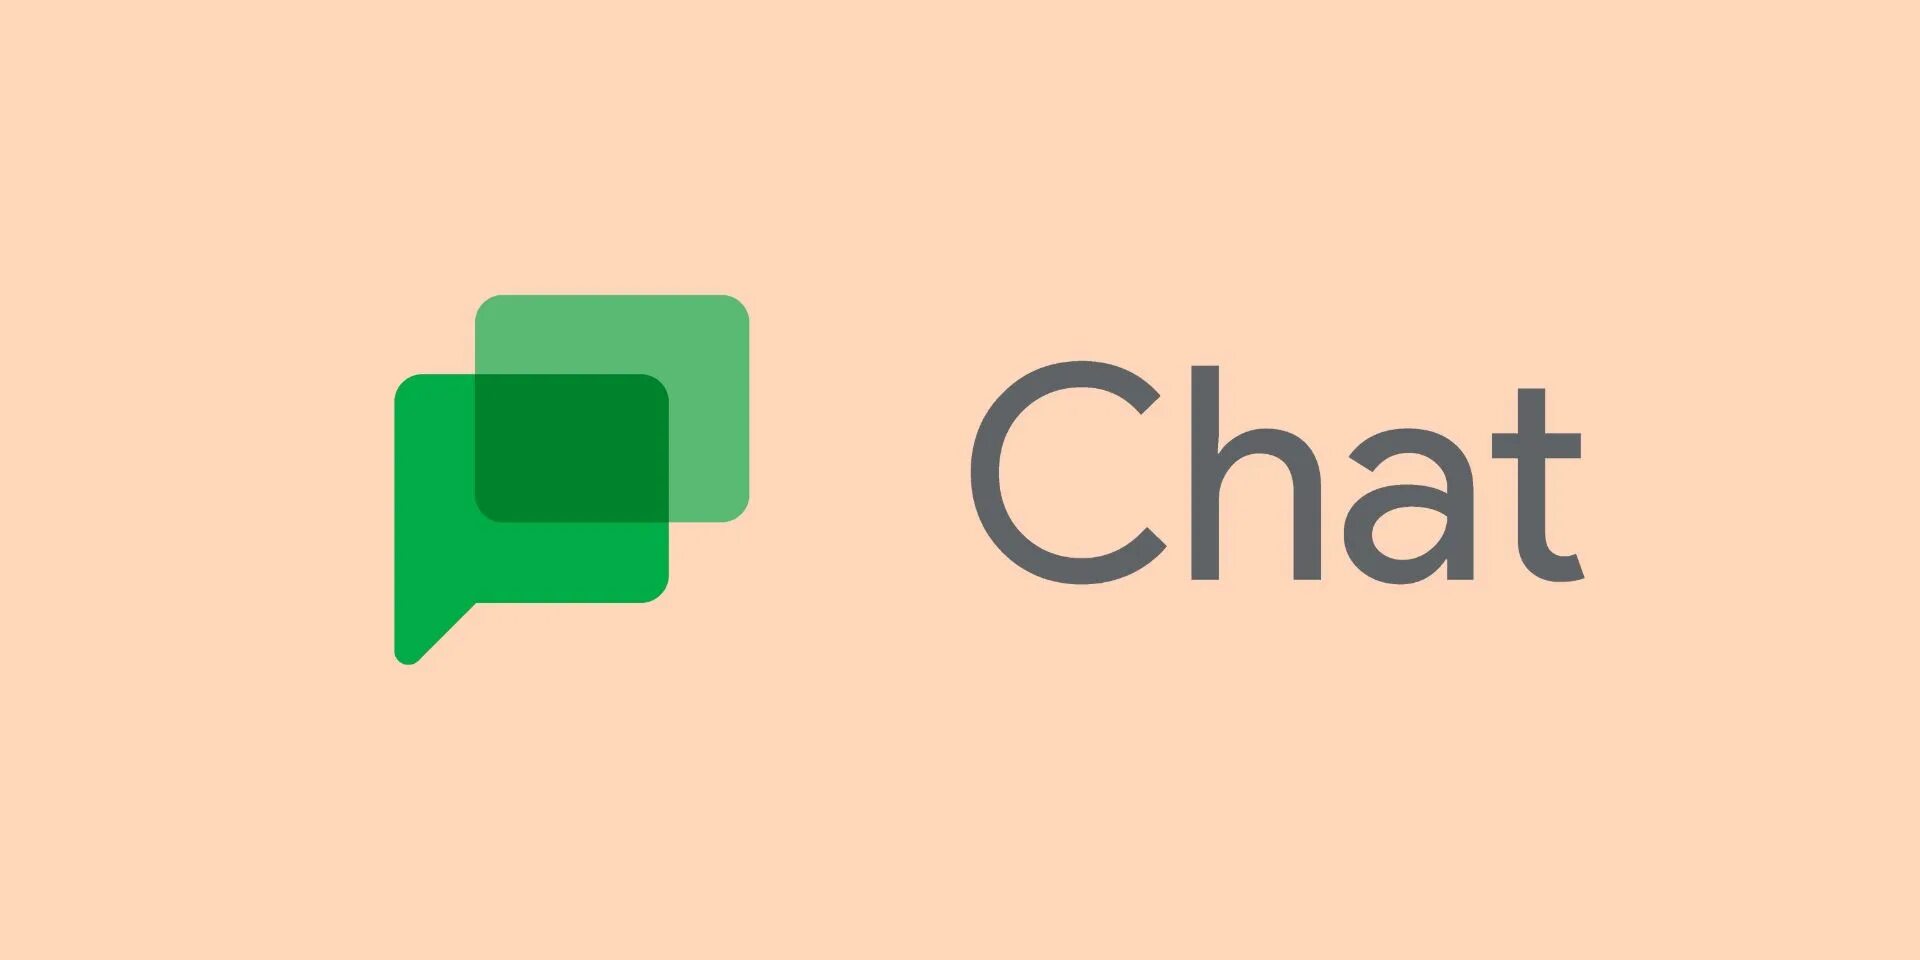 Application chats. Google chat. Chat with Google. Google chat Mod. Chat GPT logo.